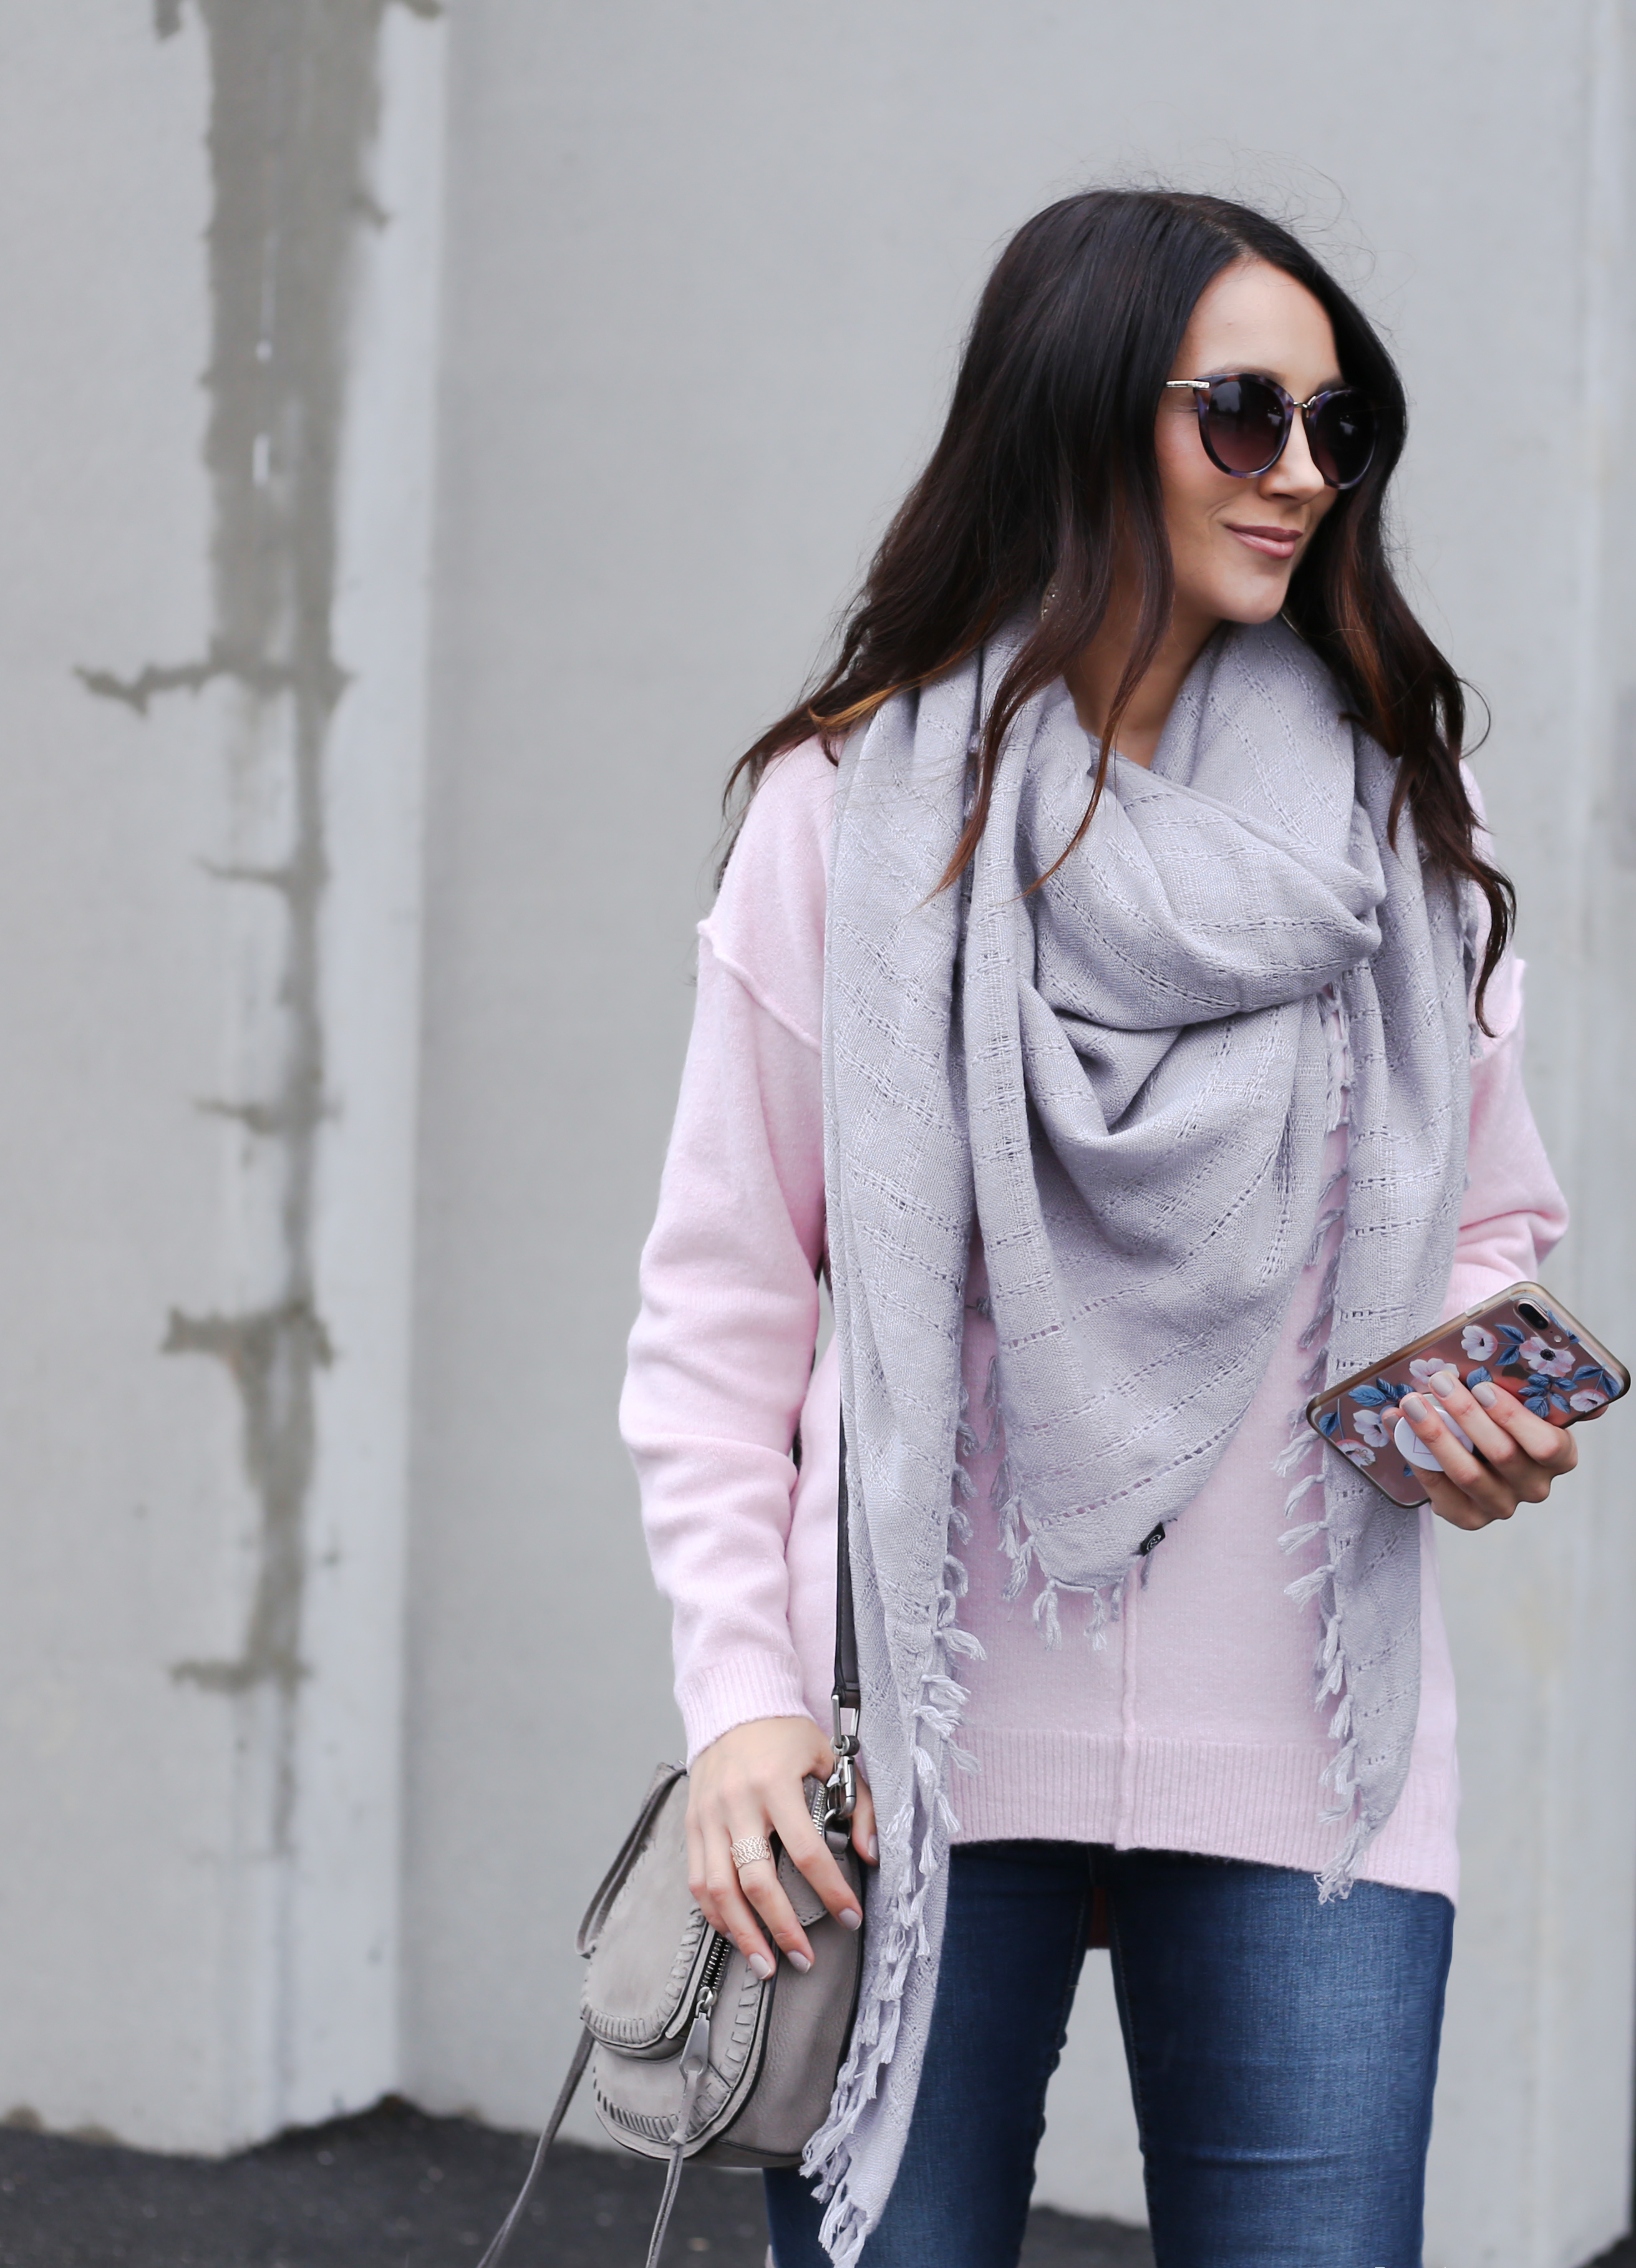 blogger Anna Monteiro wearing blush oversized sweater in casual holiday outfit